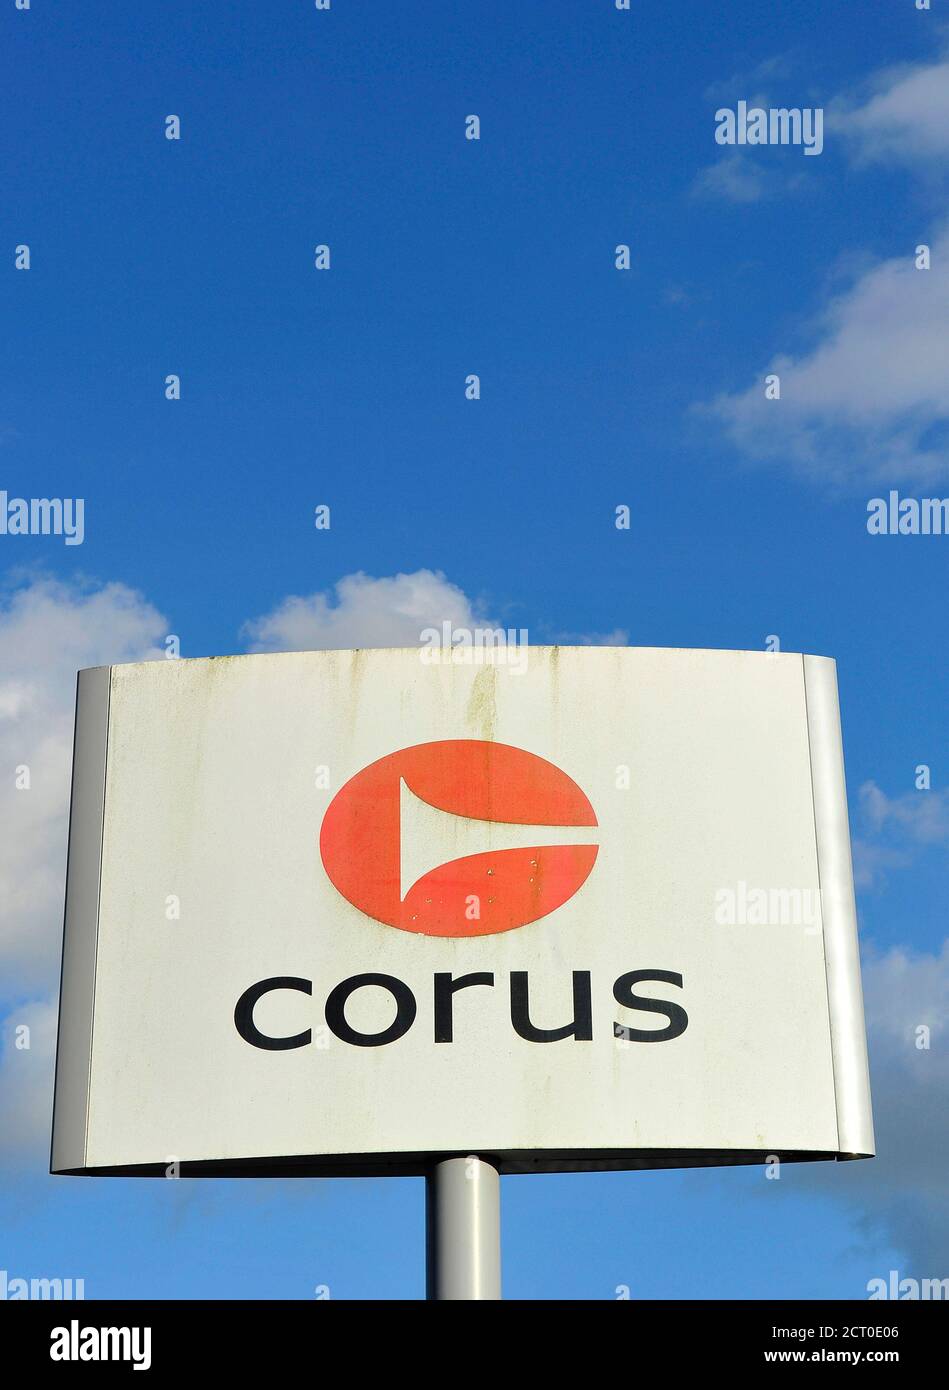 A Corus steel company logo is seen on the outskirts of Llanelli in Wales  August 11, 2010. In 2007, Tata Steel paid $13 billion for Anglo-Dutch steel  maker Corus, the largest acquisition